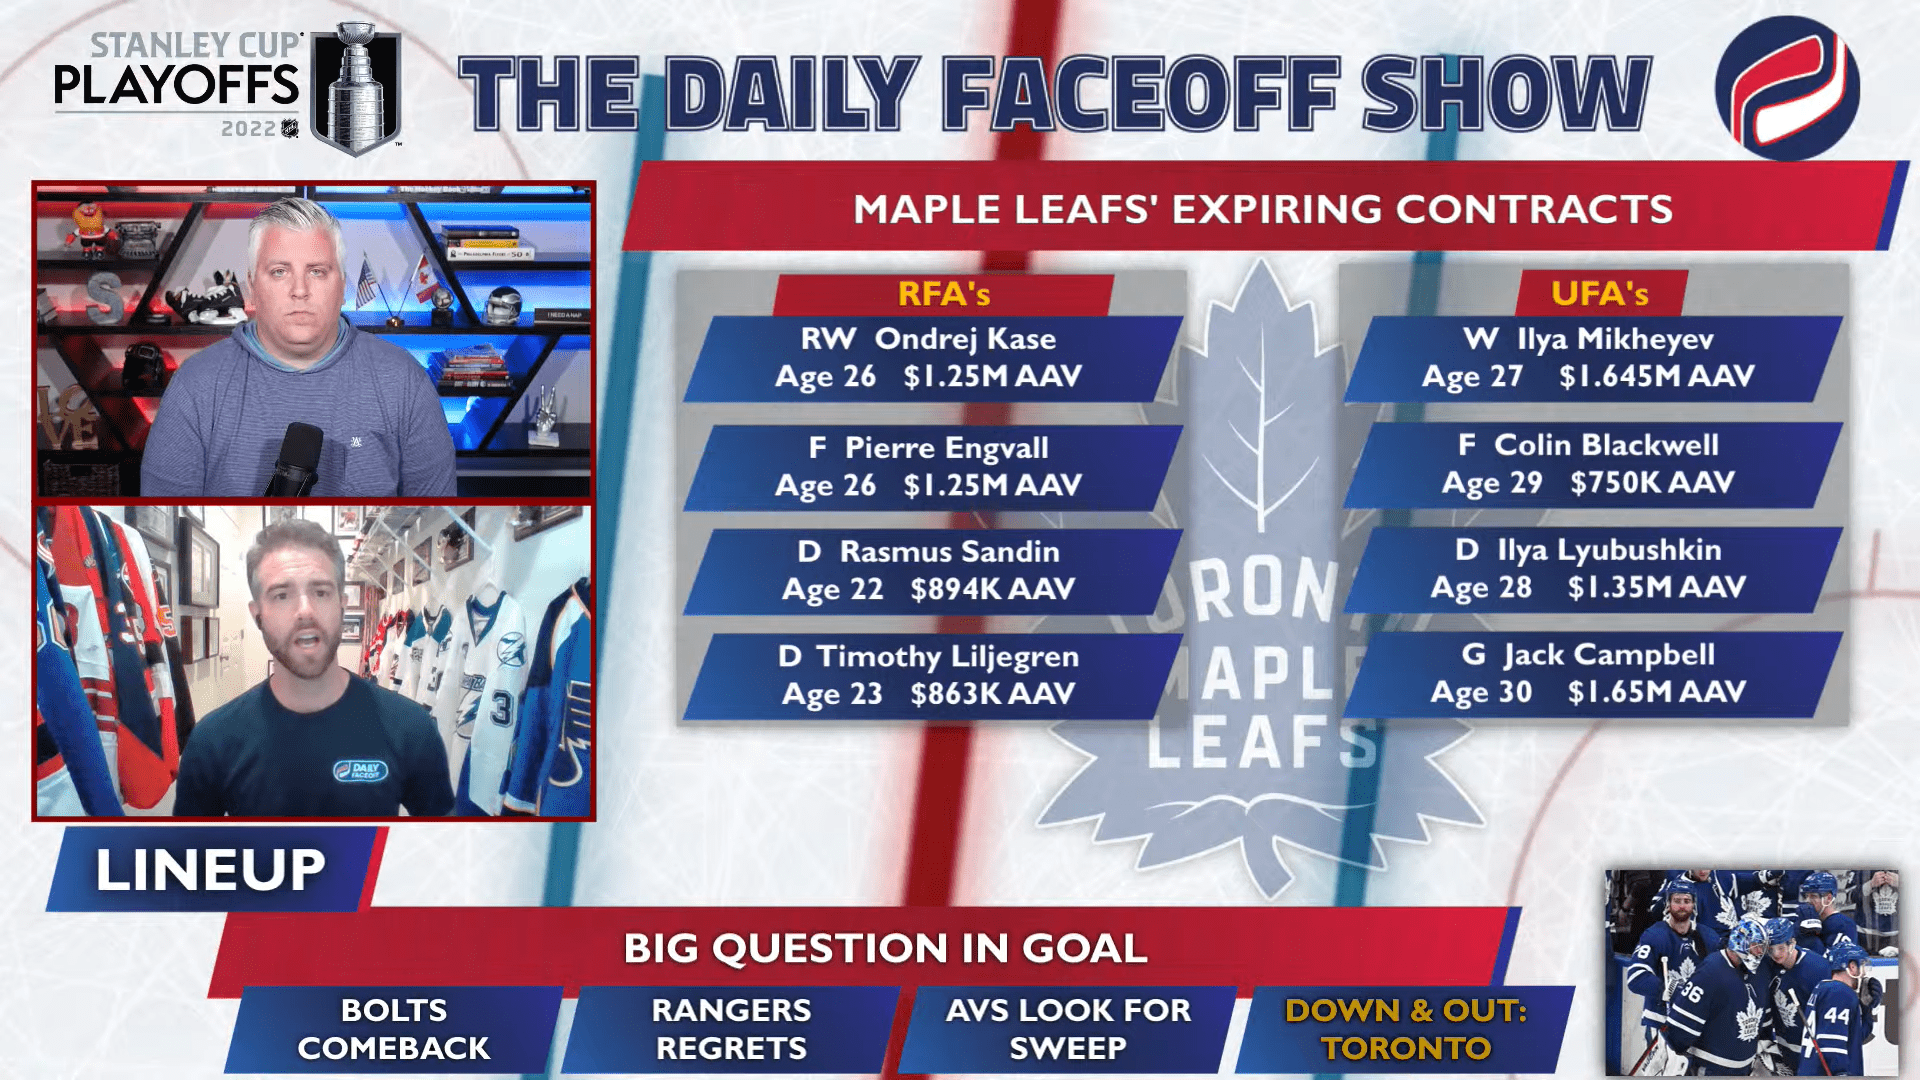 Down and Out: The Toronto Maple Leafs have questions in goal this offseason